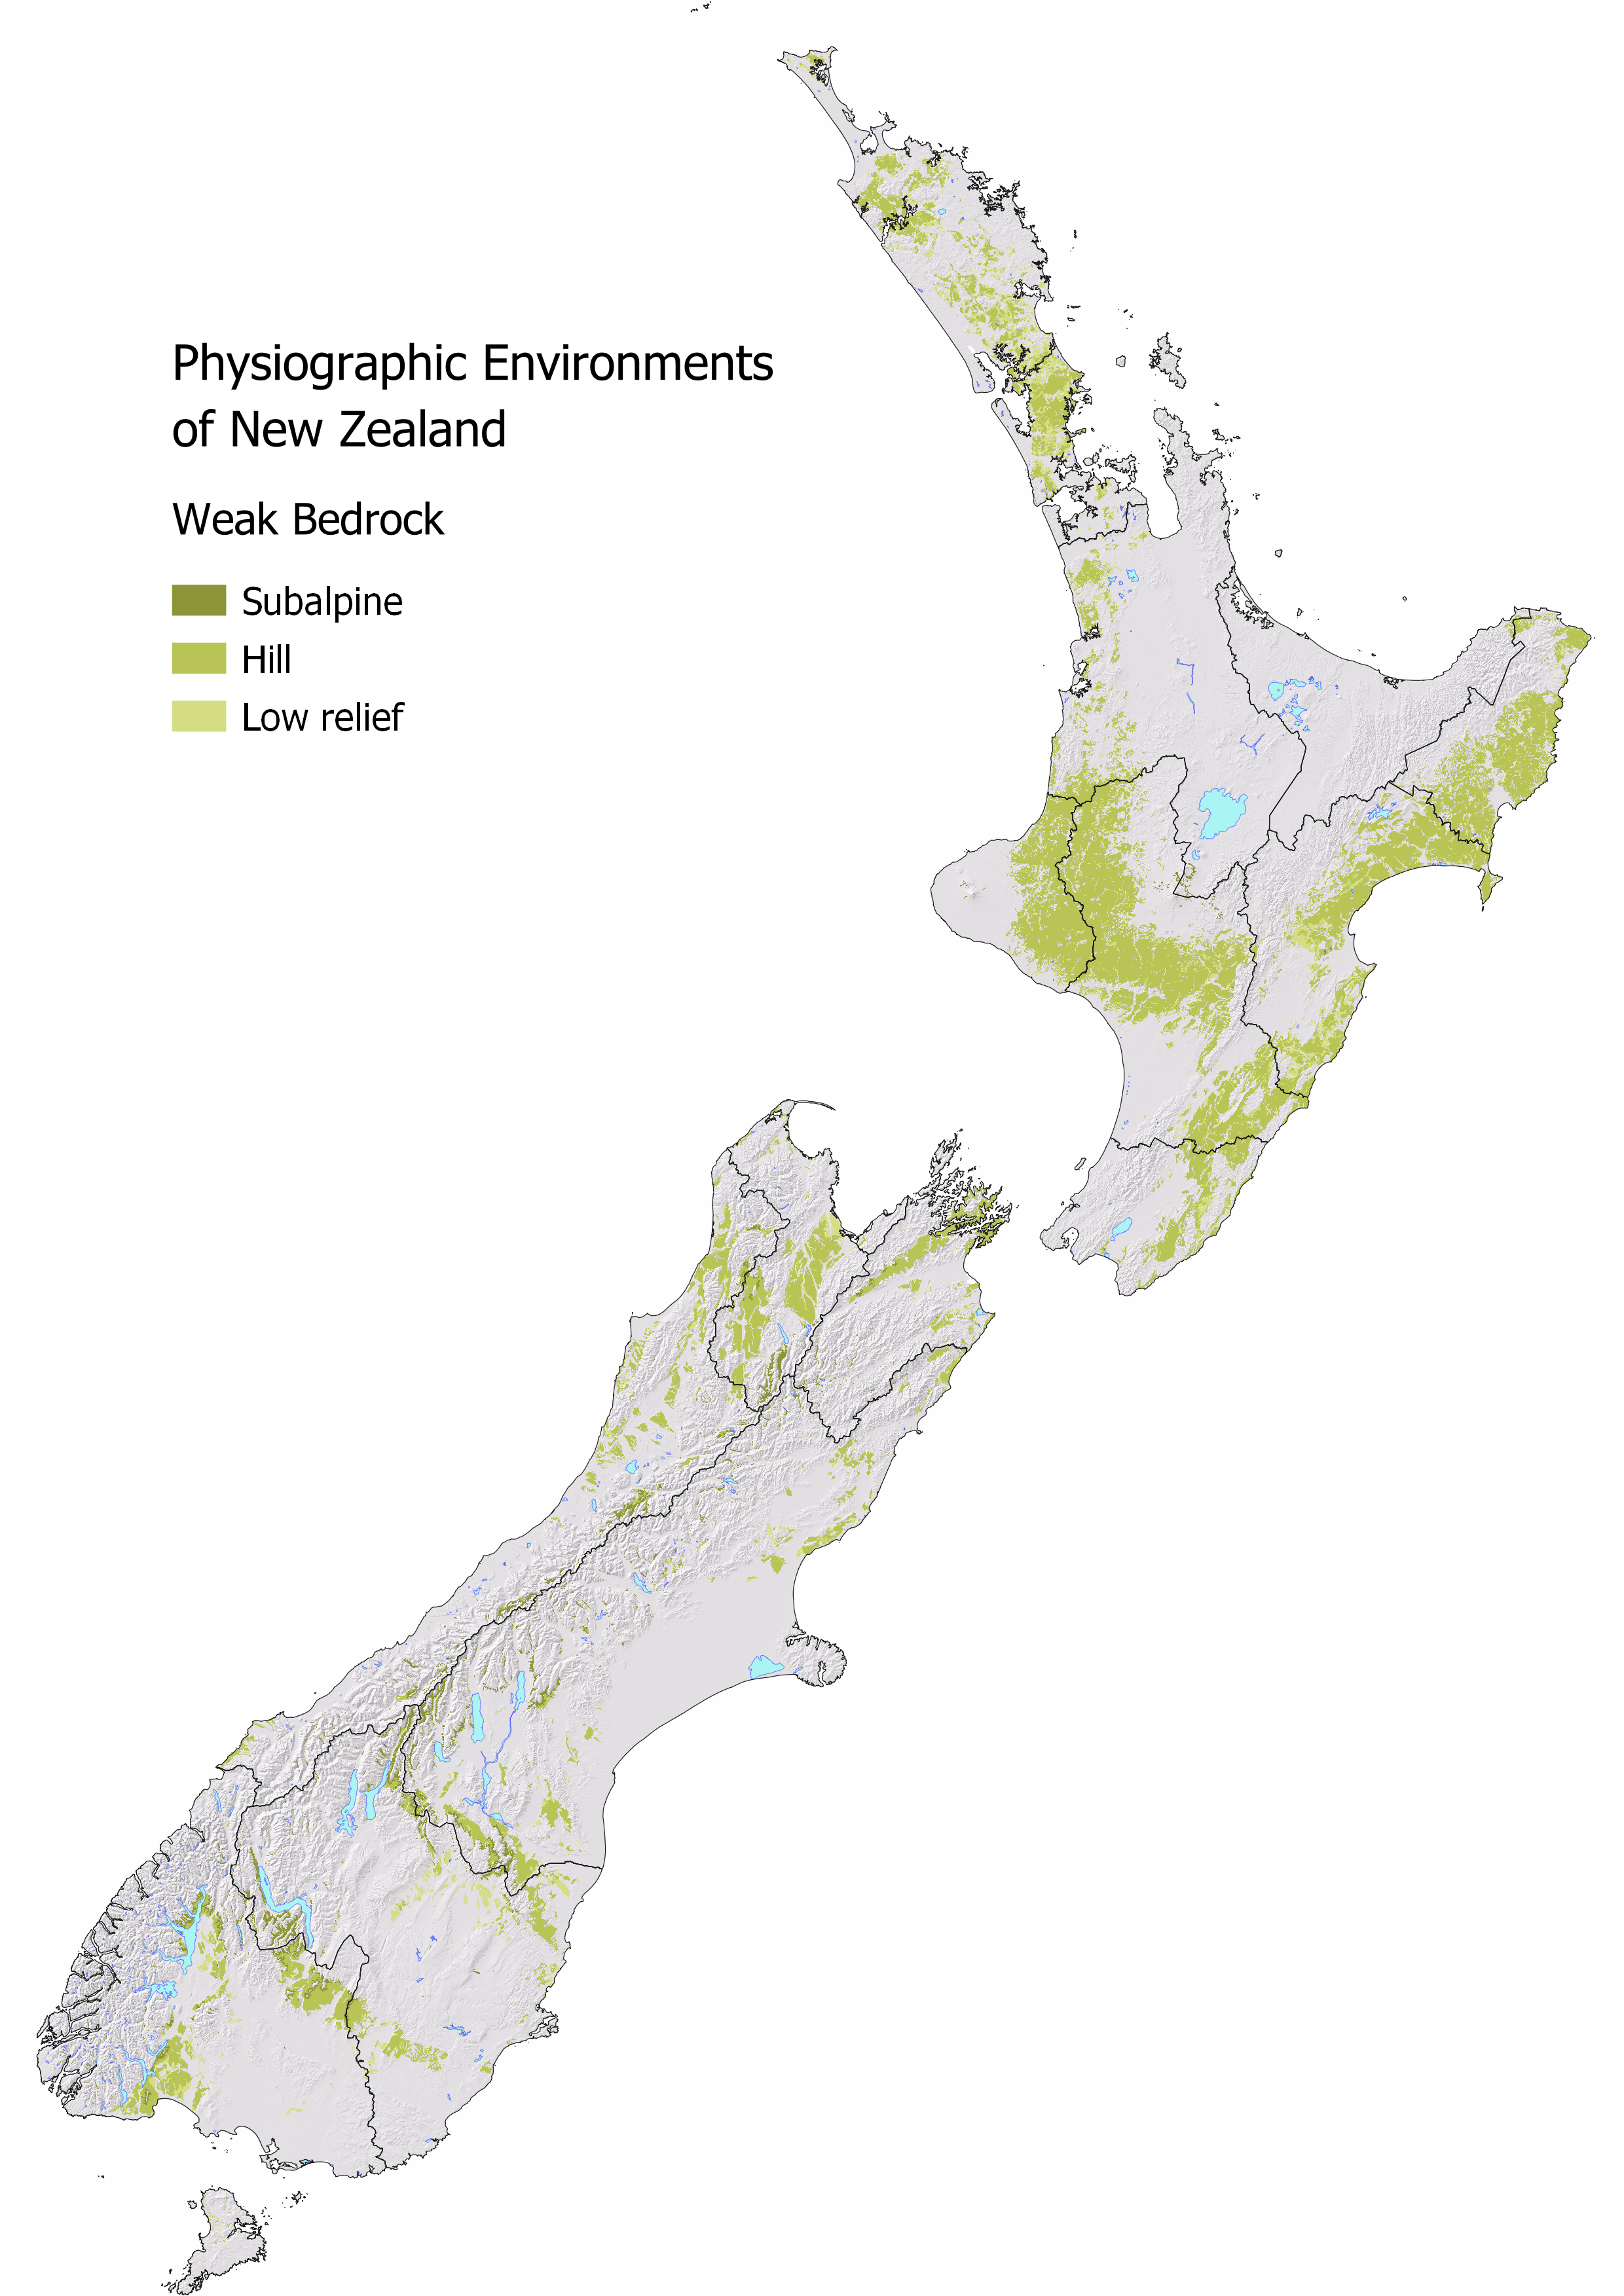 slope map of new zealand with the parts classified as 'Weak Bedrock' showing.